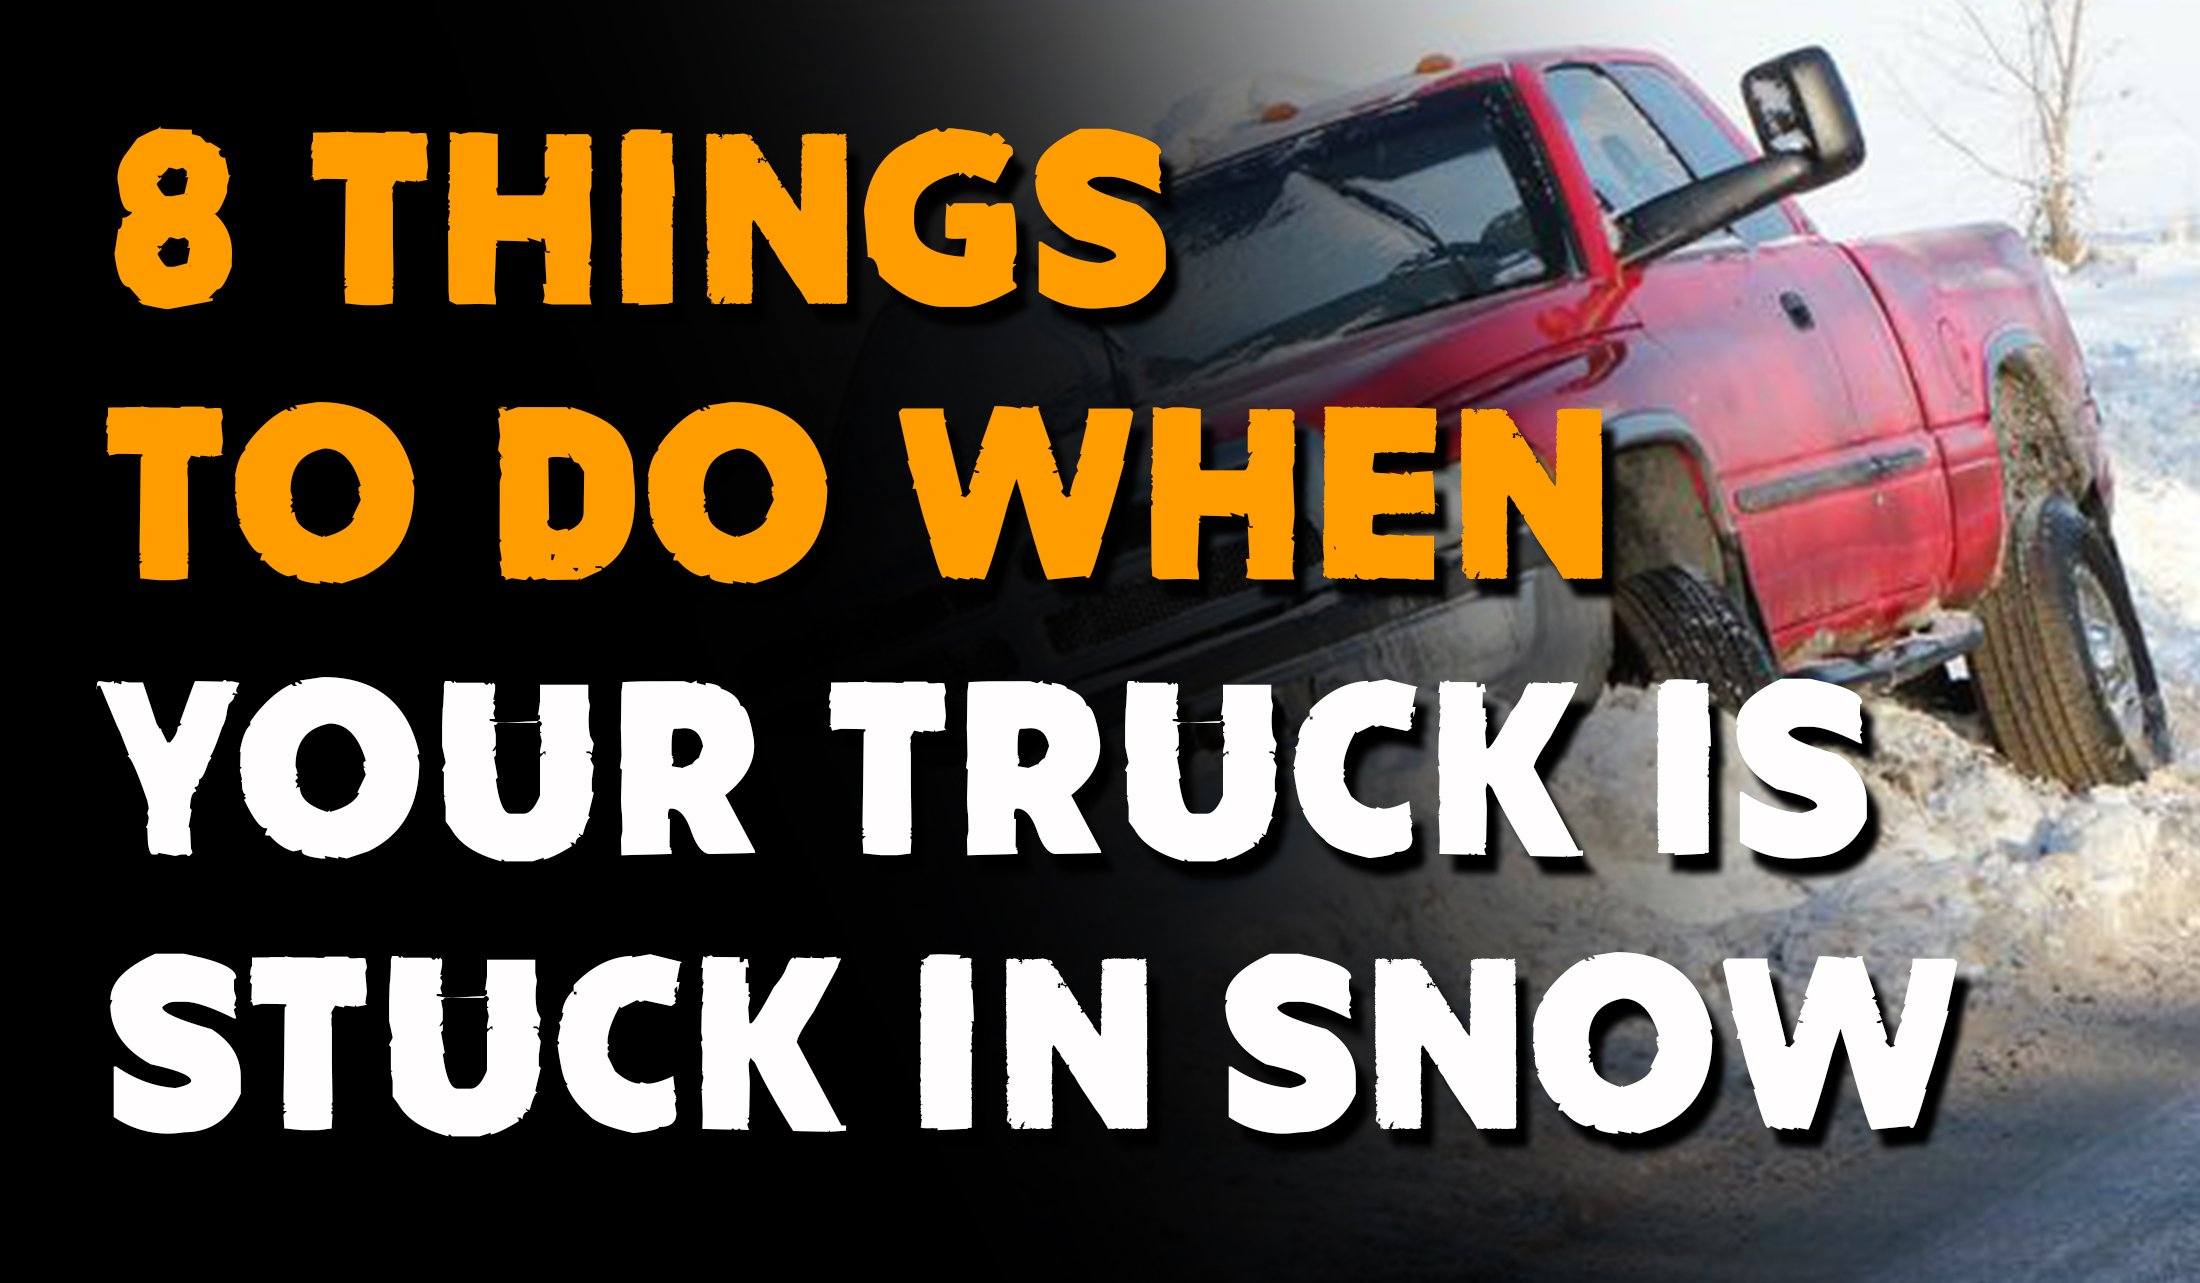 8 Things To Do When Your Truck Is Stuck In Snow